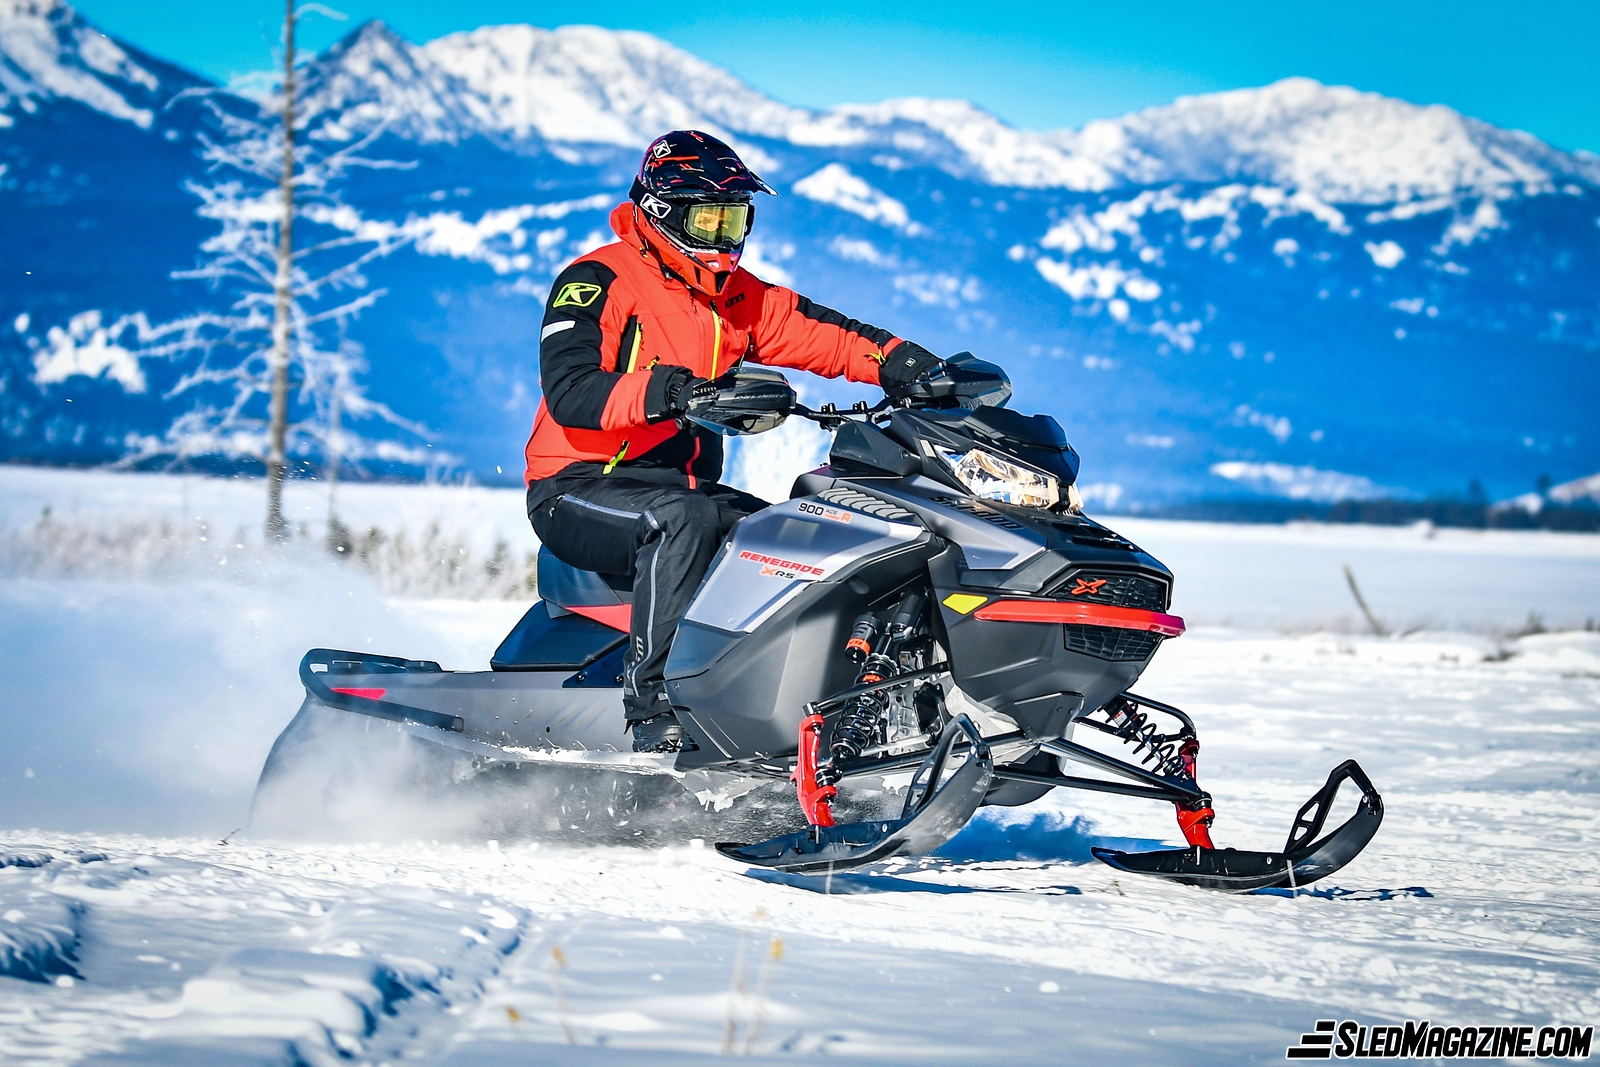 Why are snowmobile prices going up so much?